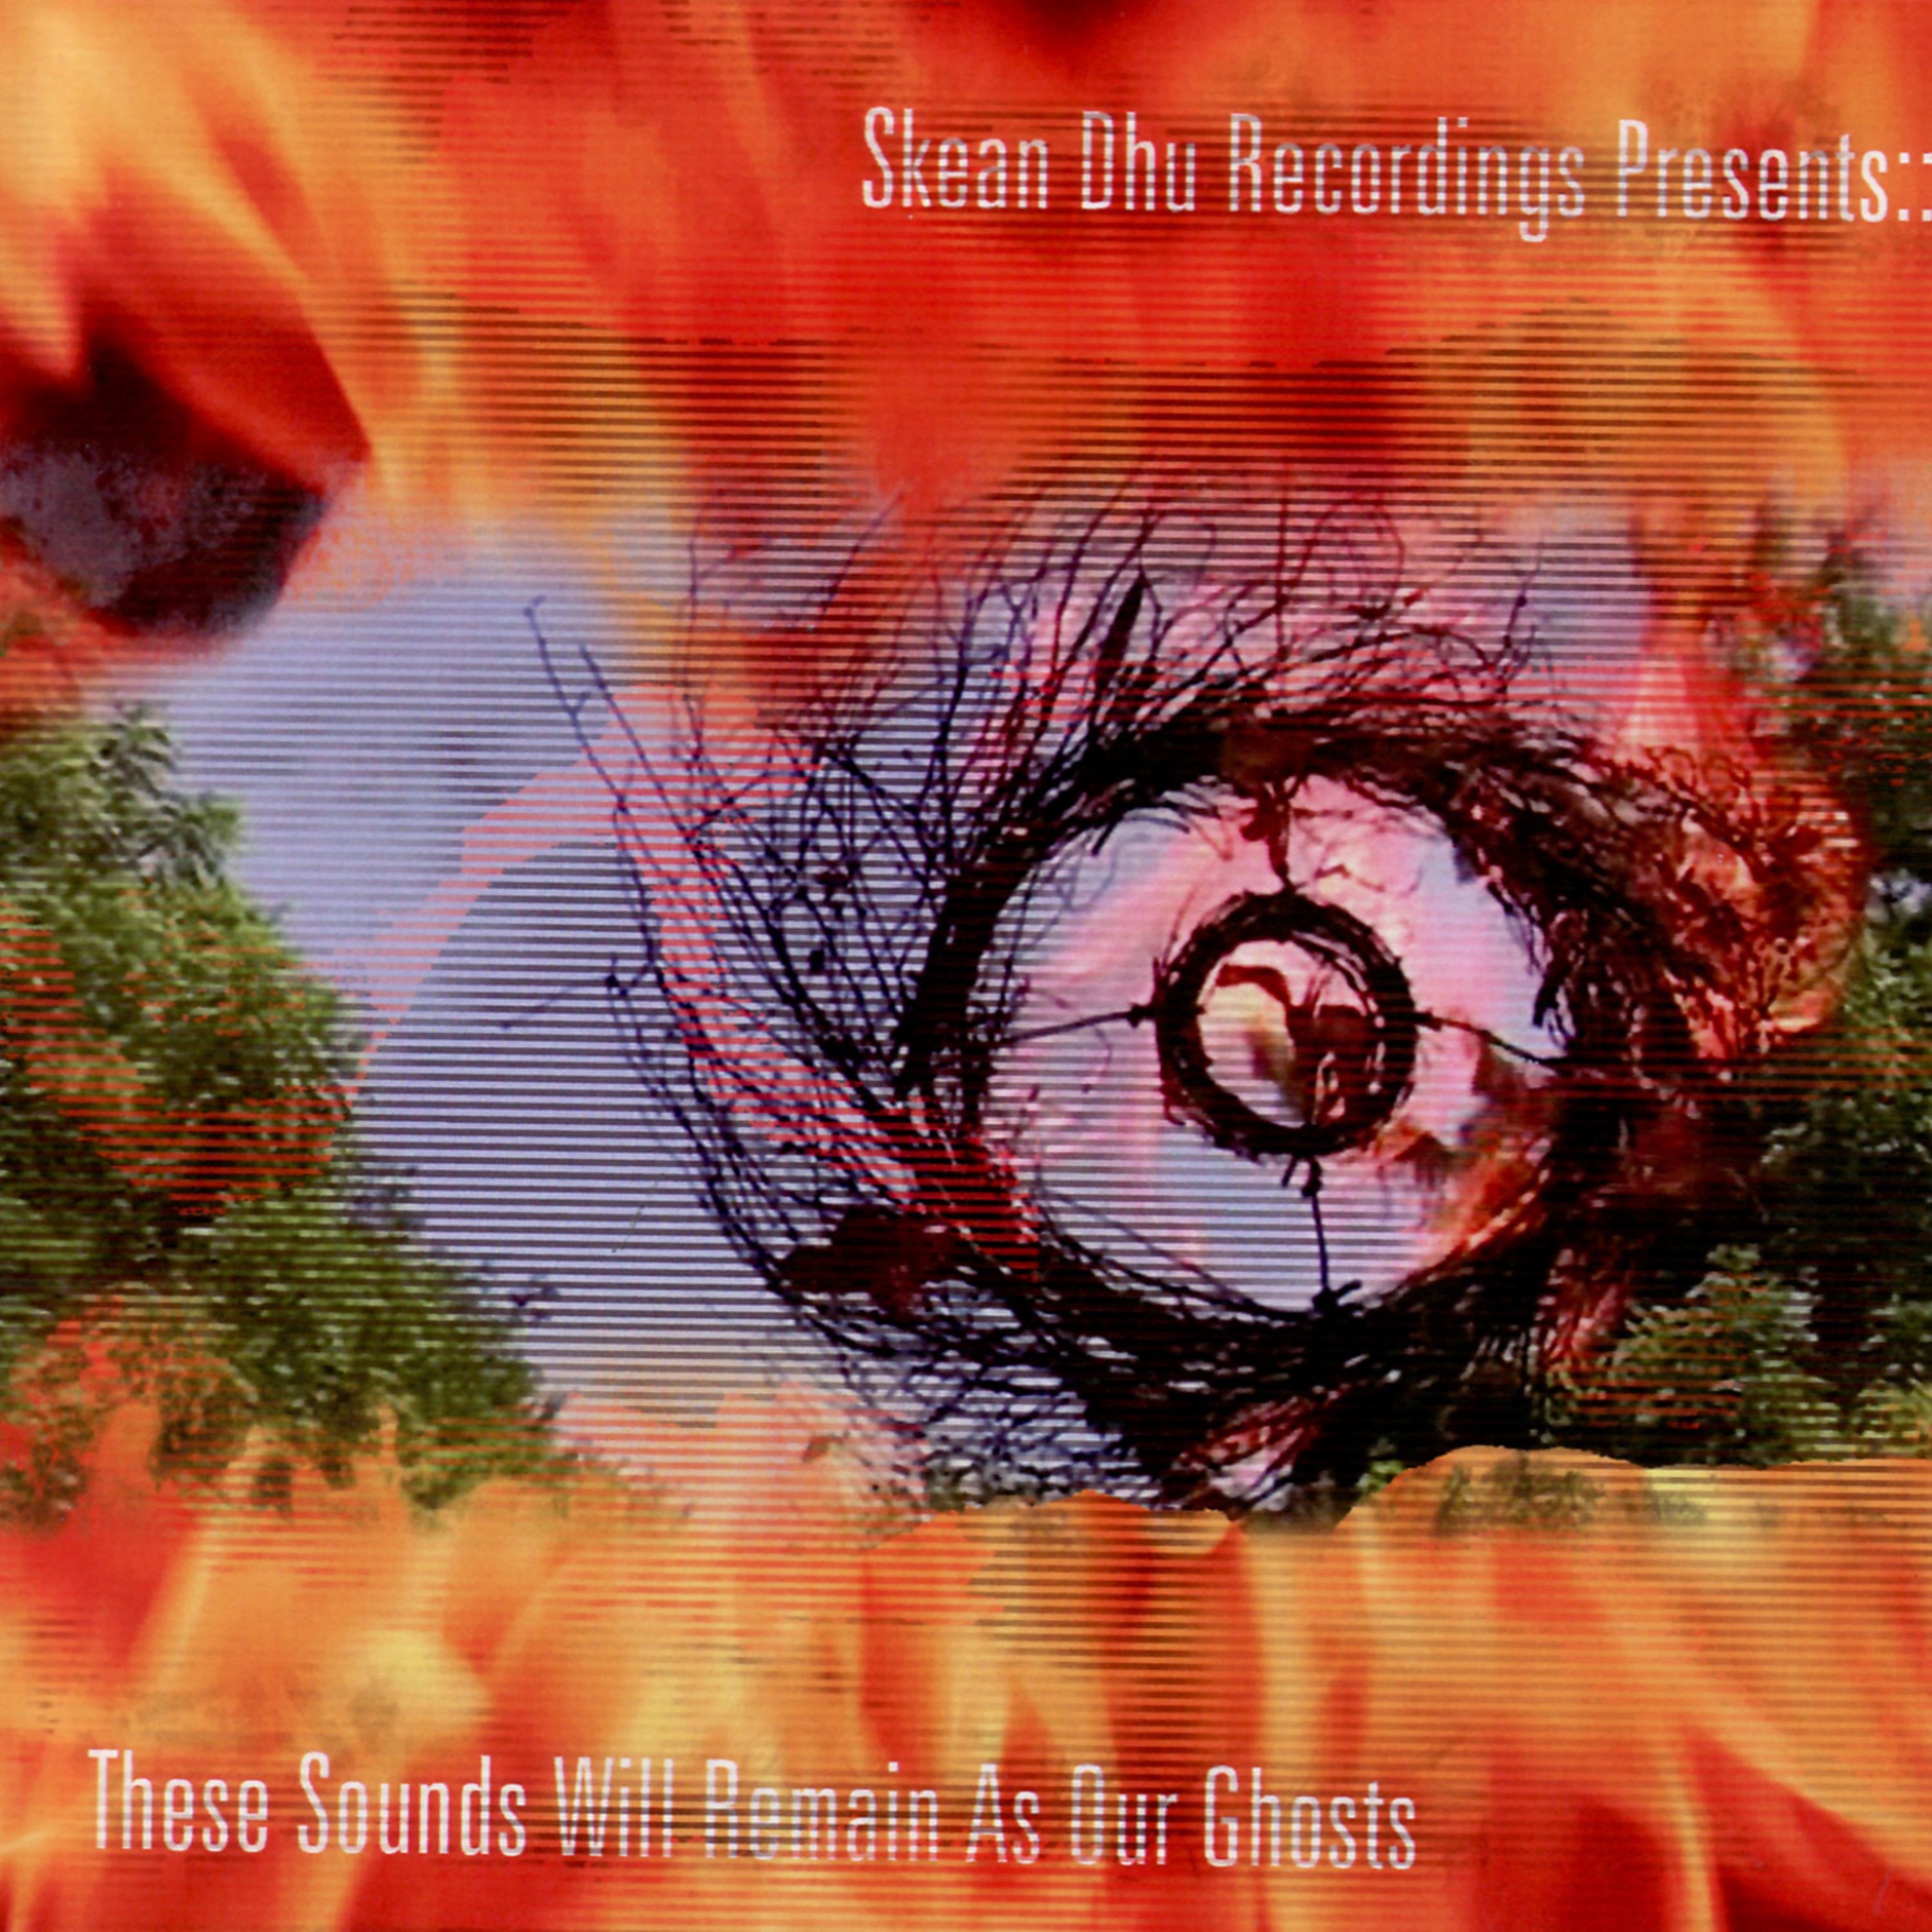 Постер альбома Skean Dhu Recordings Presents: These Sounds Will Remain As Our Ghosts